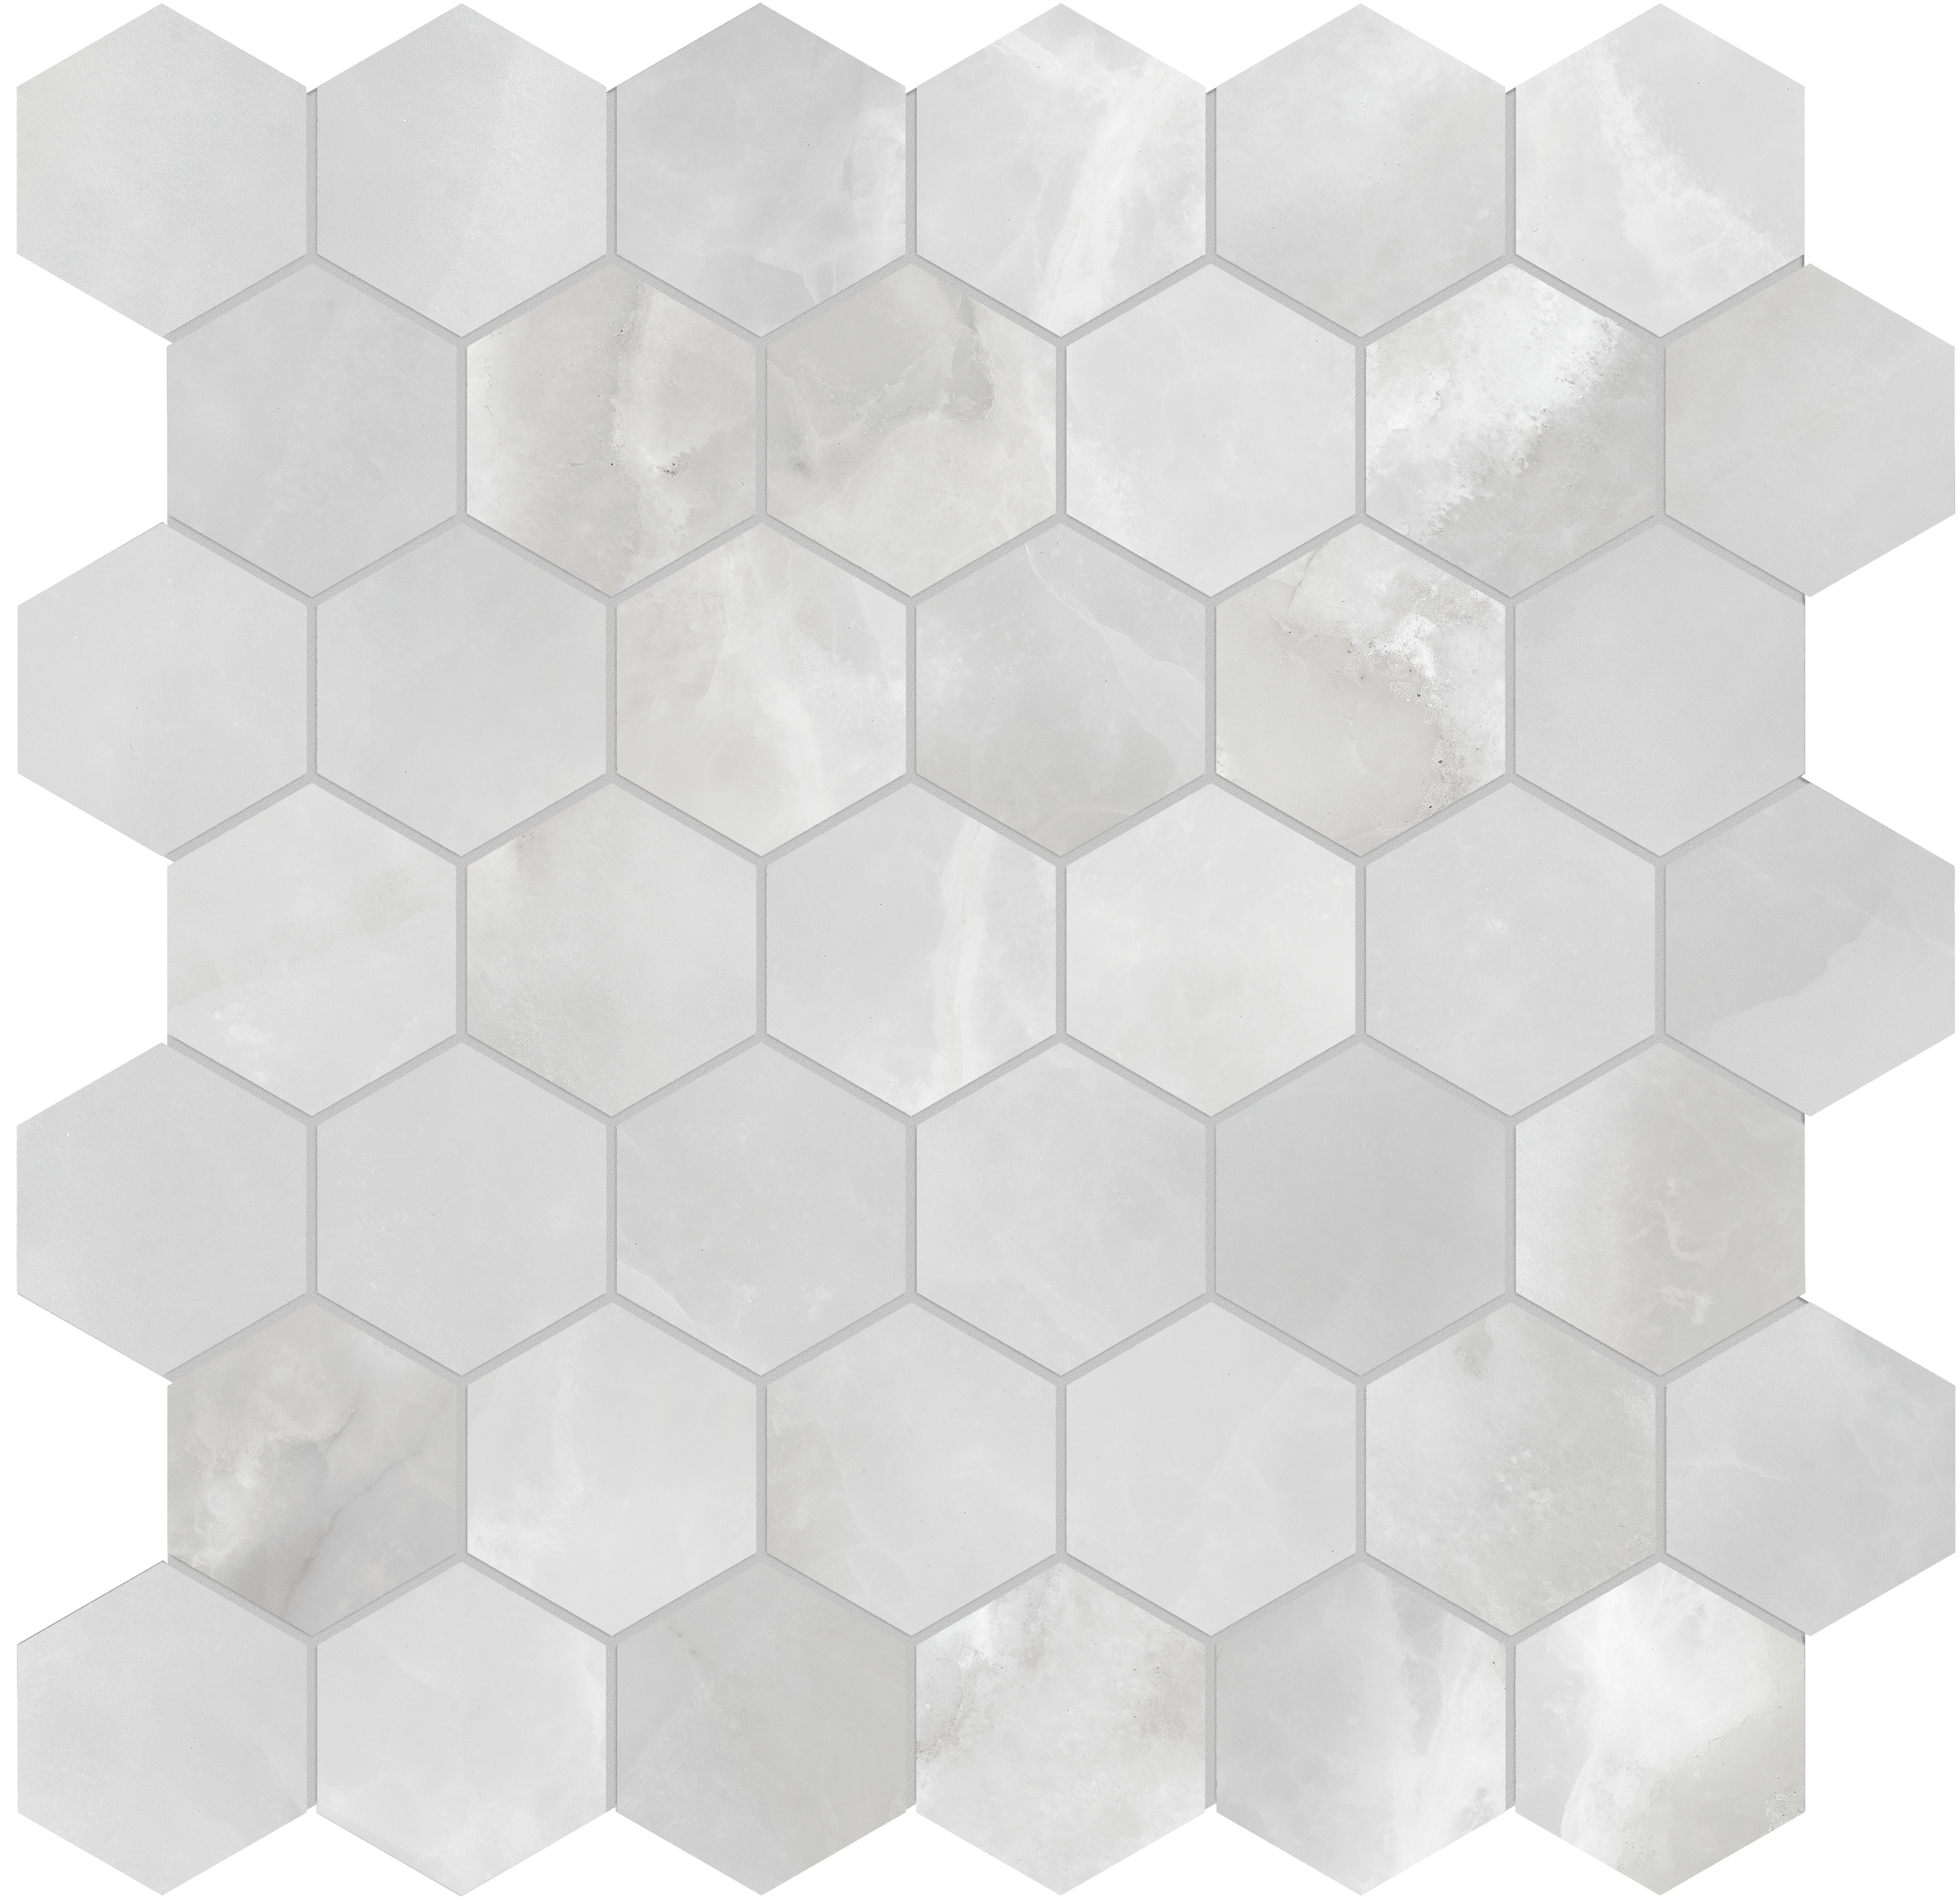 onyx crystallo hexagon 2-inch pattern glazed porcelain mosaic from plata anatolia collection distributed by surface group international polished finish rectified edge mesh shape